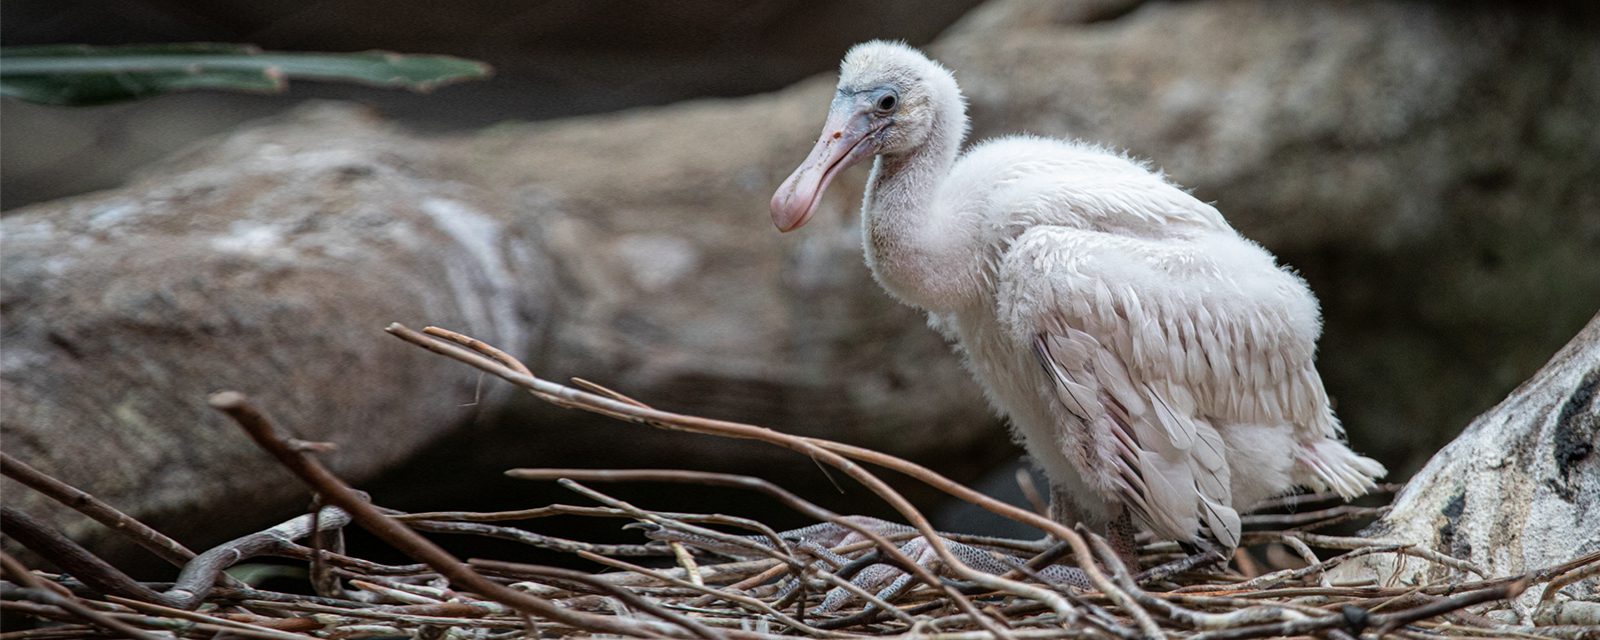 Lincoln Park Zoo Announces Naming Contest for Recently Hatched African Spoonbill Chick